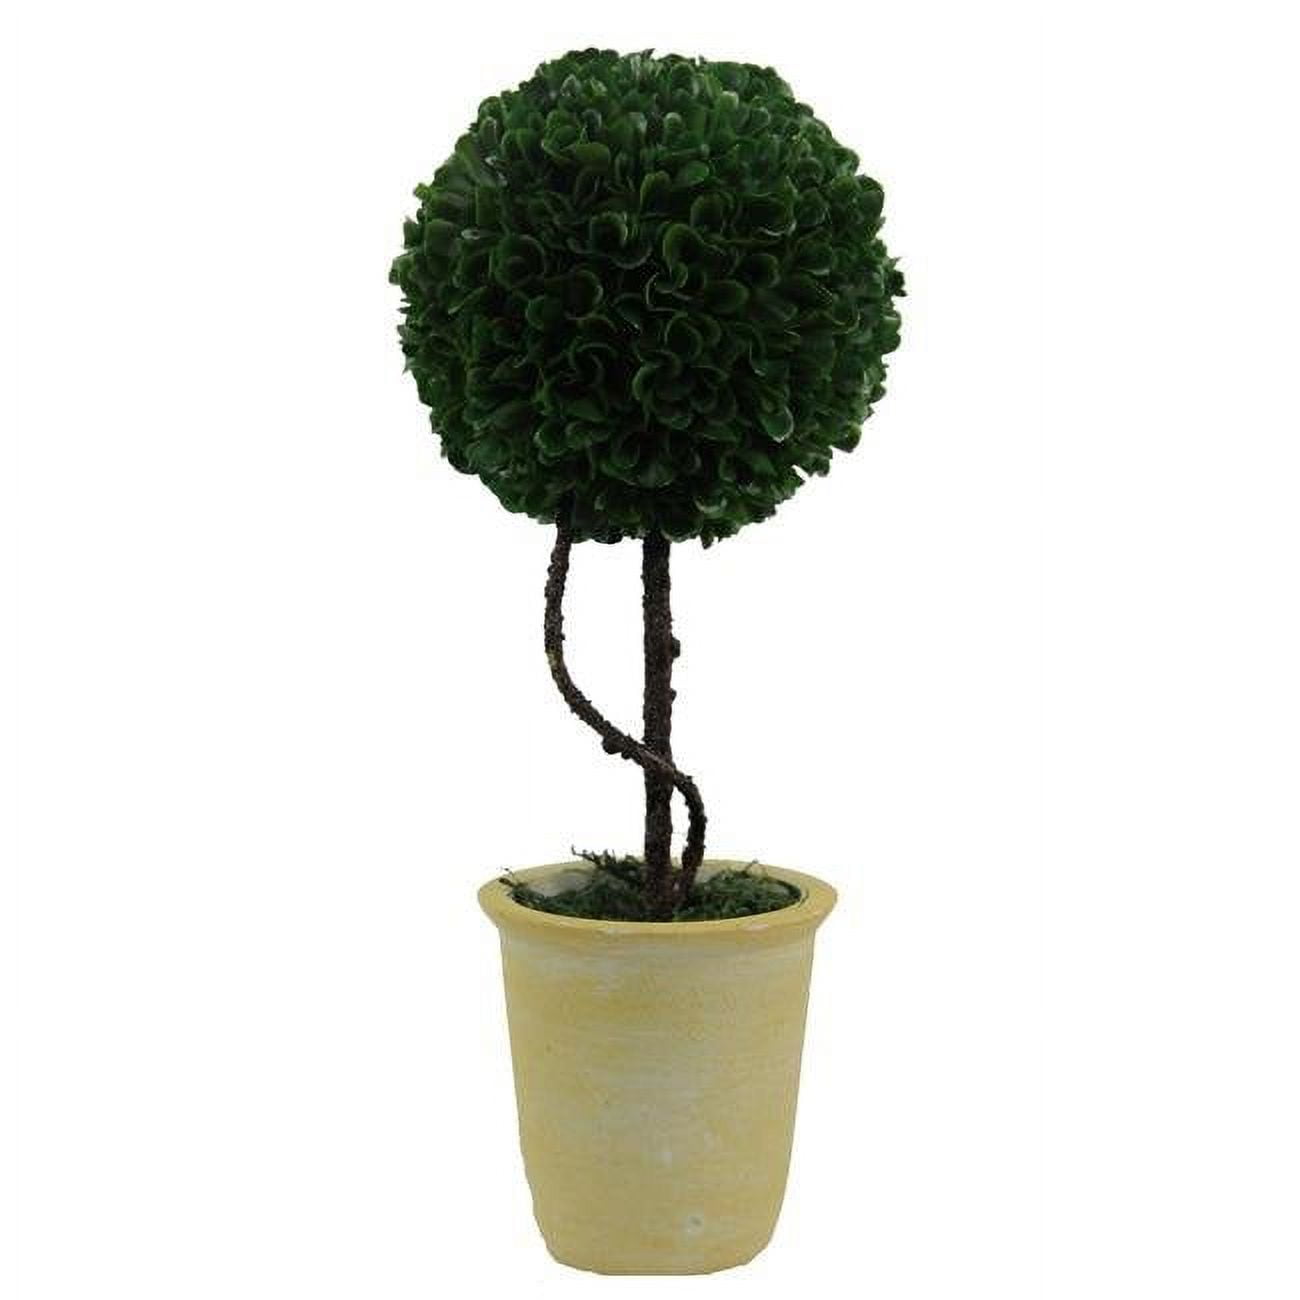 Picture of Admired By Nature ABN5P010-GRN 13 in. Faux Preserved Artificial Boxwood Ball Topiary Plant Tabletop in Pot